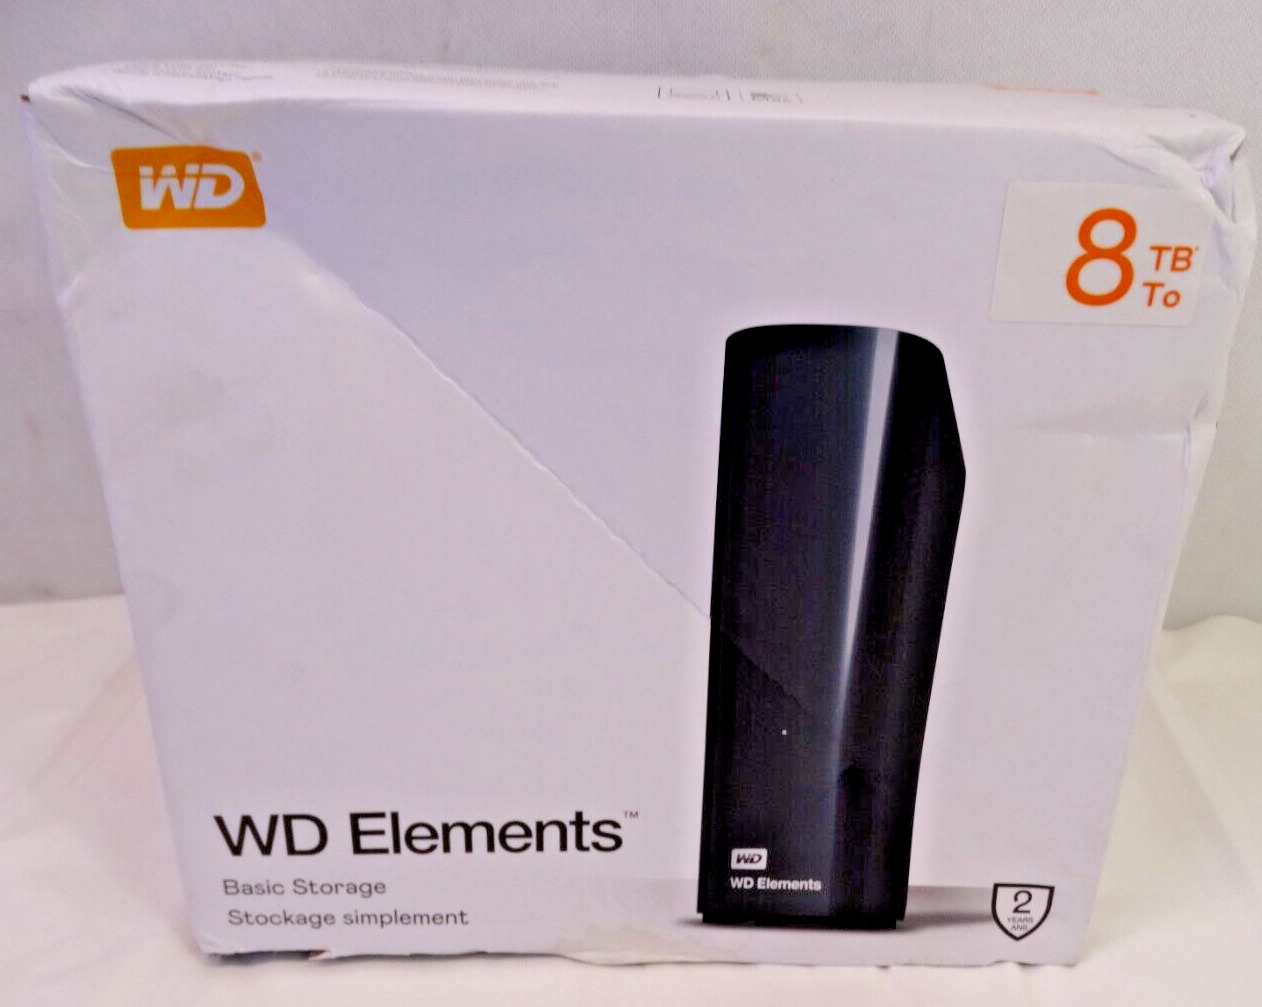 WD Elements 8 TB To Basic Storage Drive, New Open Box